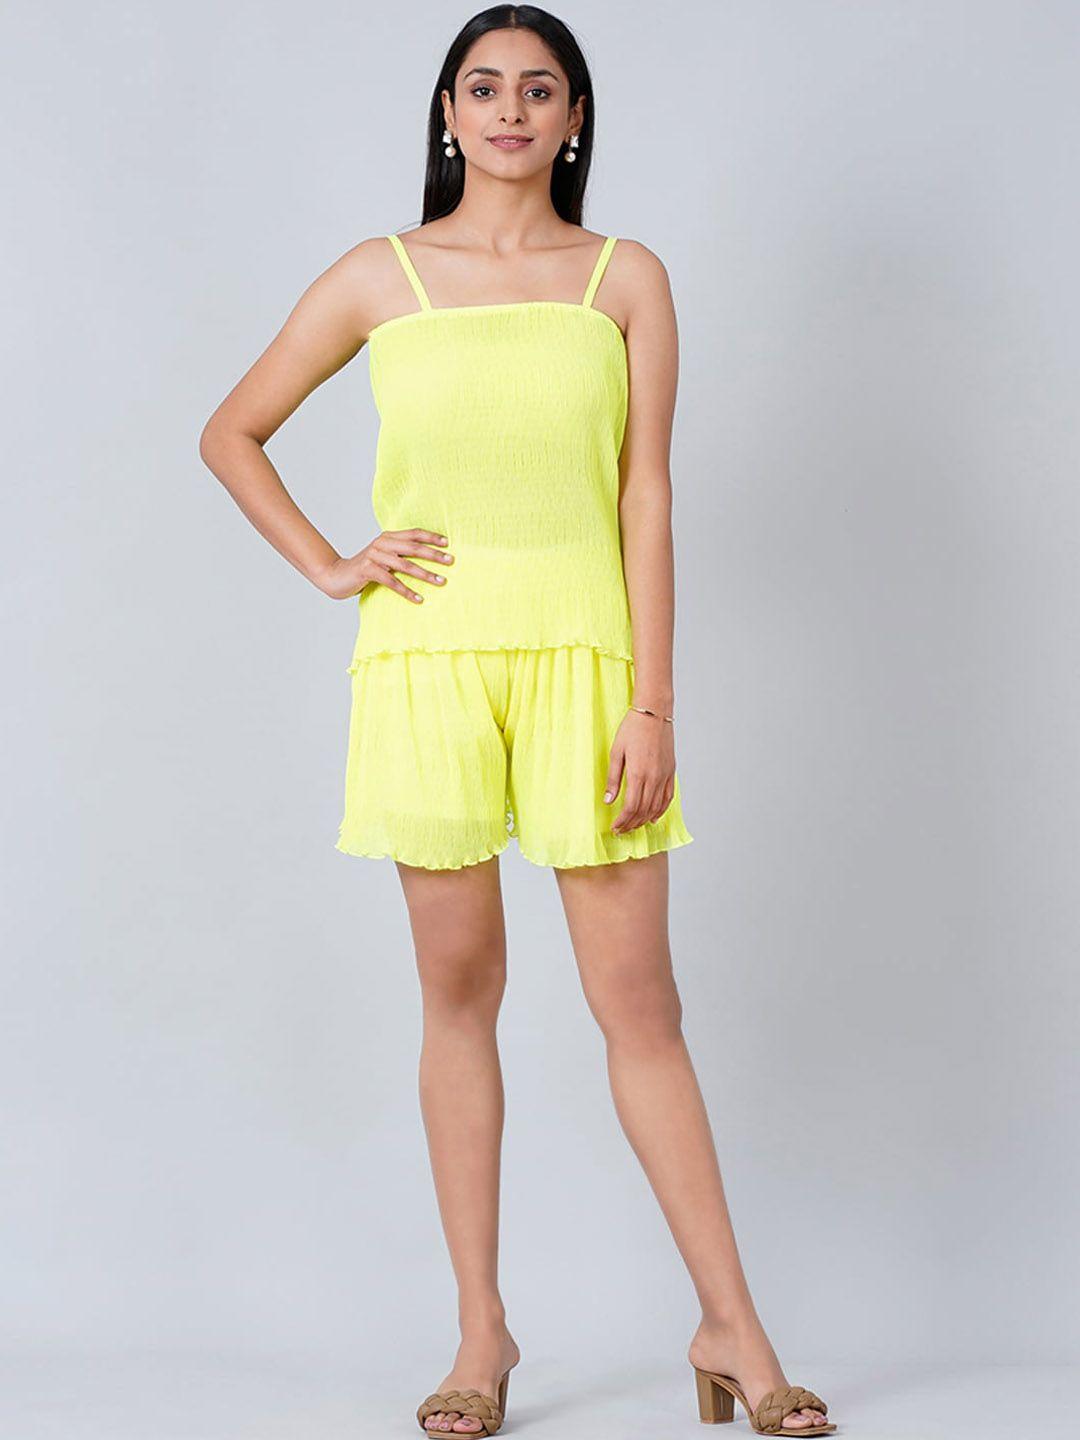 first resort by ramola bachchan camisole & shorts co-ords